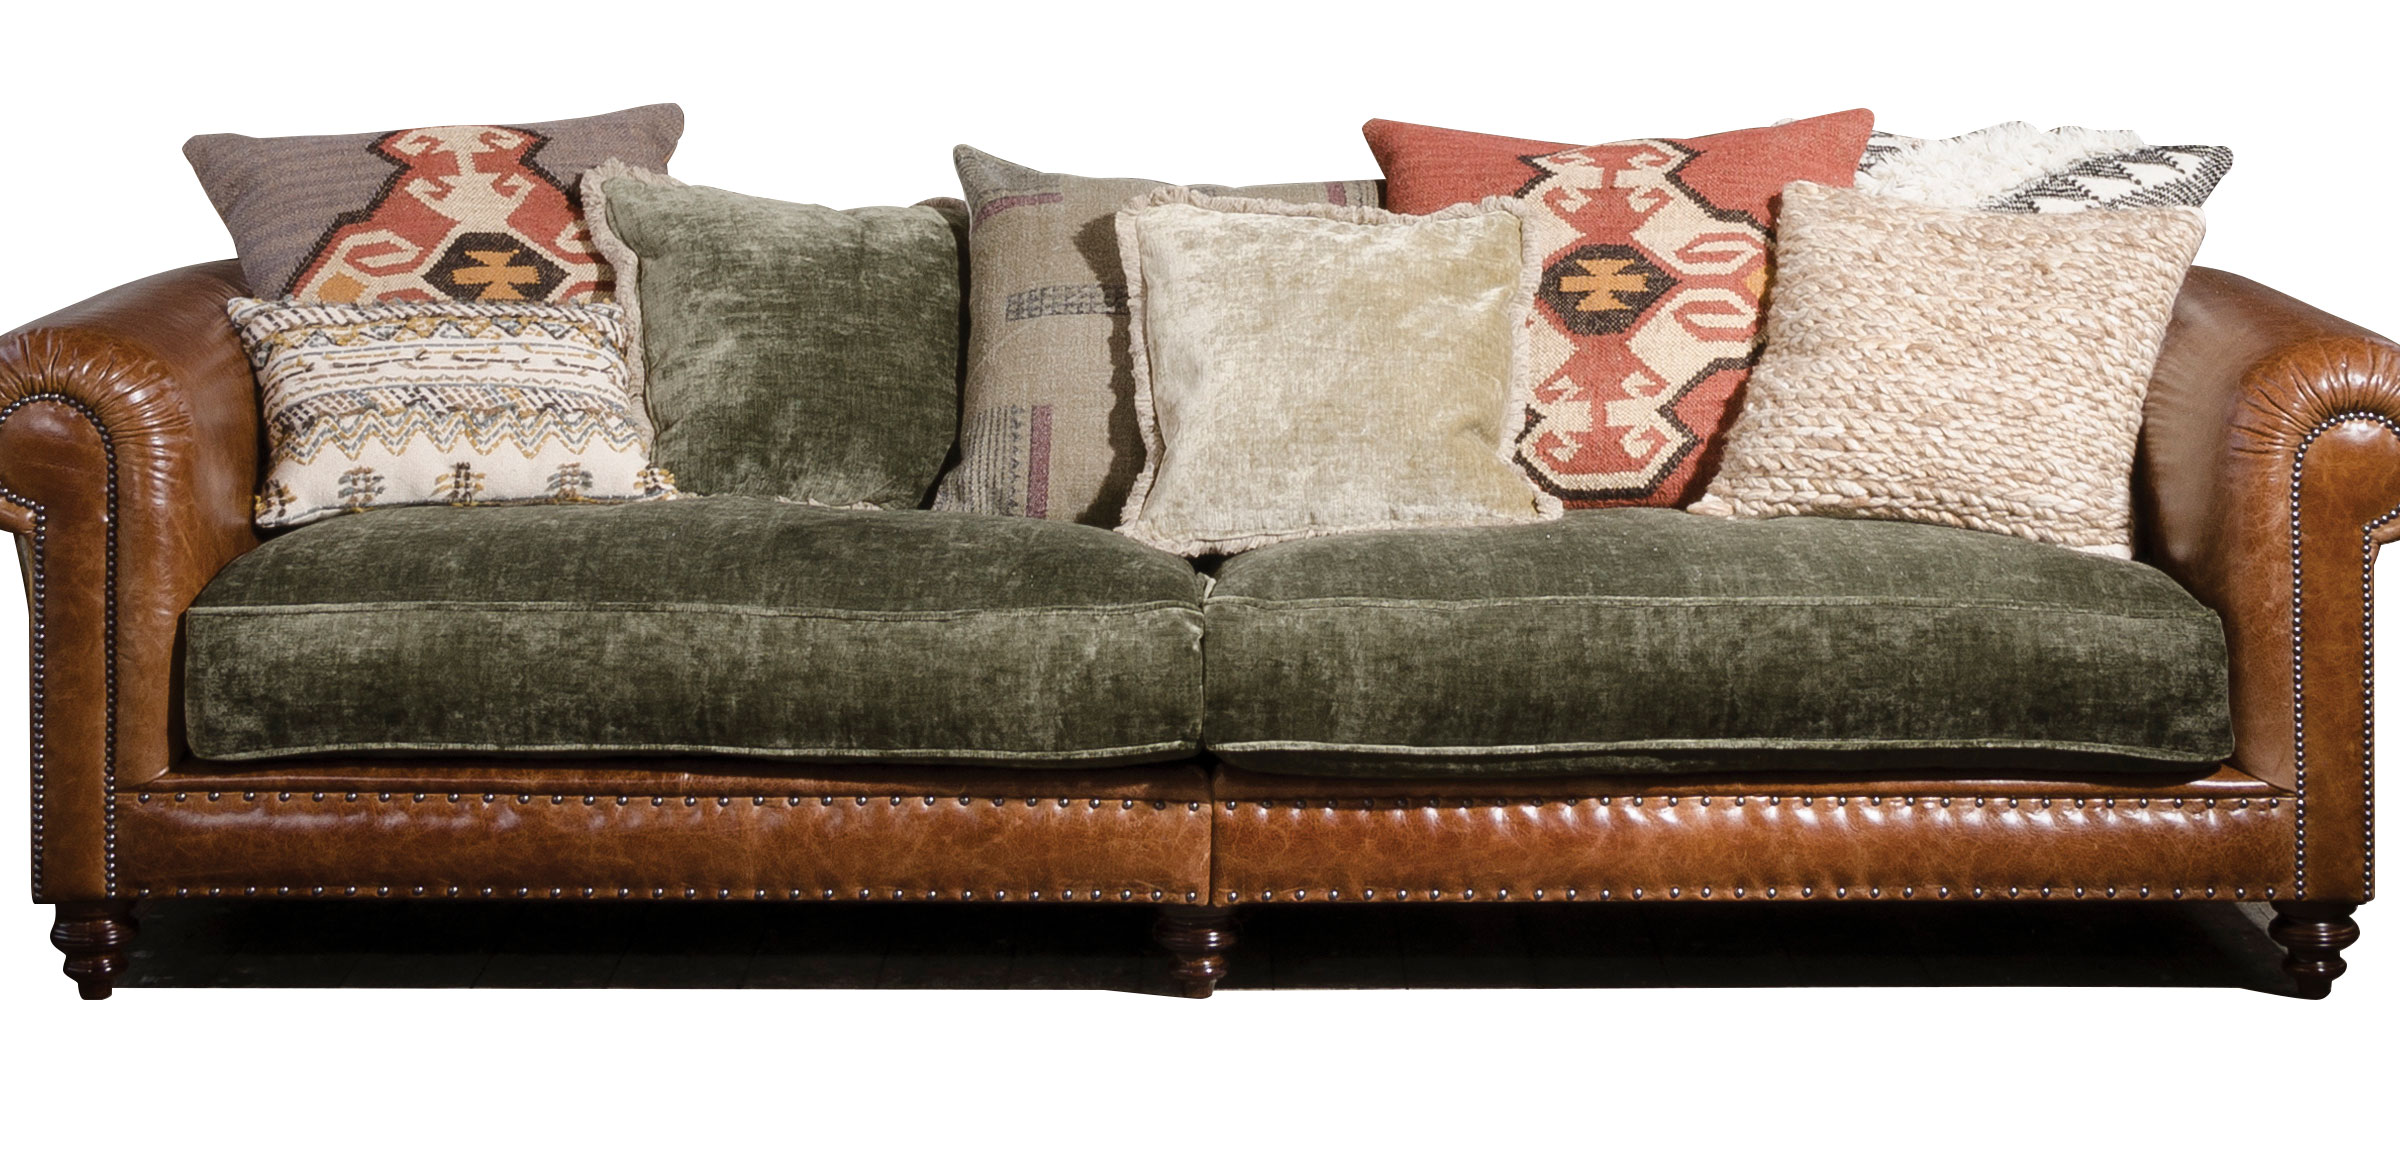 acceptere molekyle kyst Gaucho Sofa & Chair Collection - Seats & Sofas Worcester